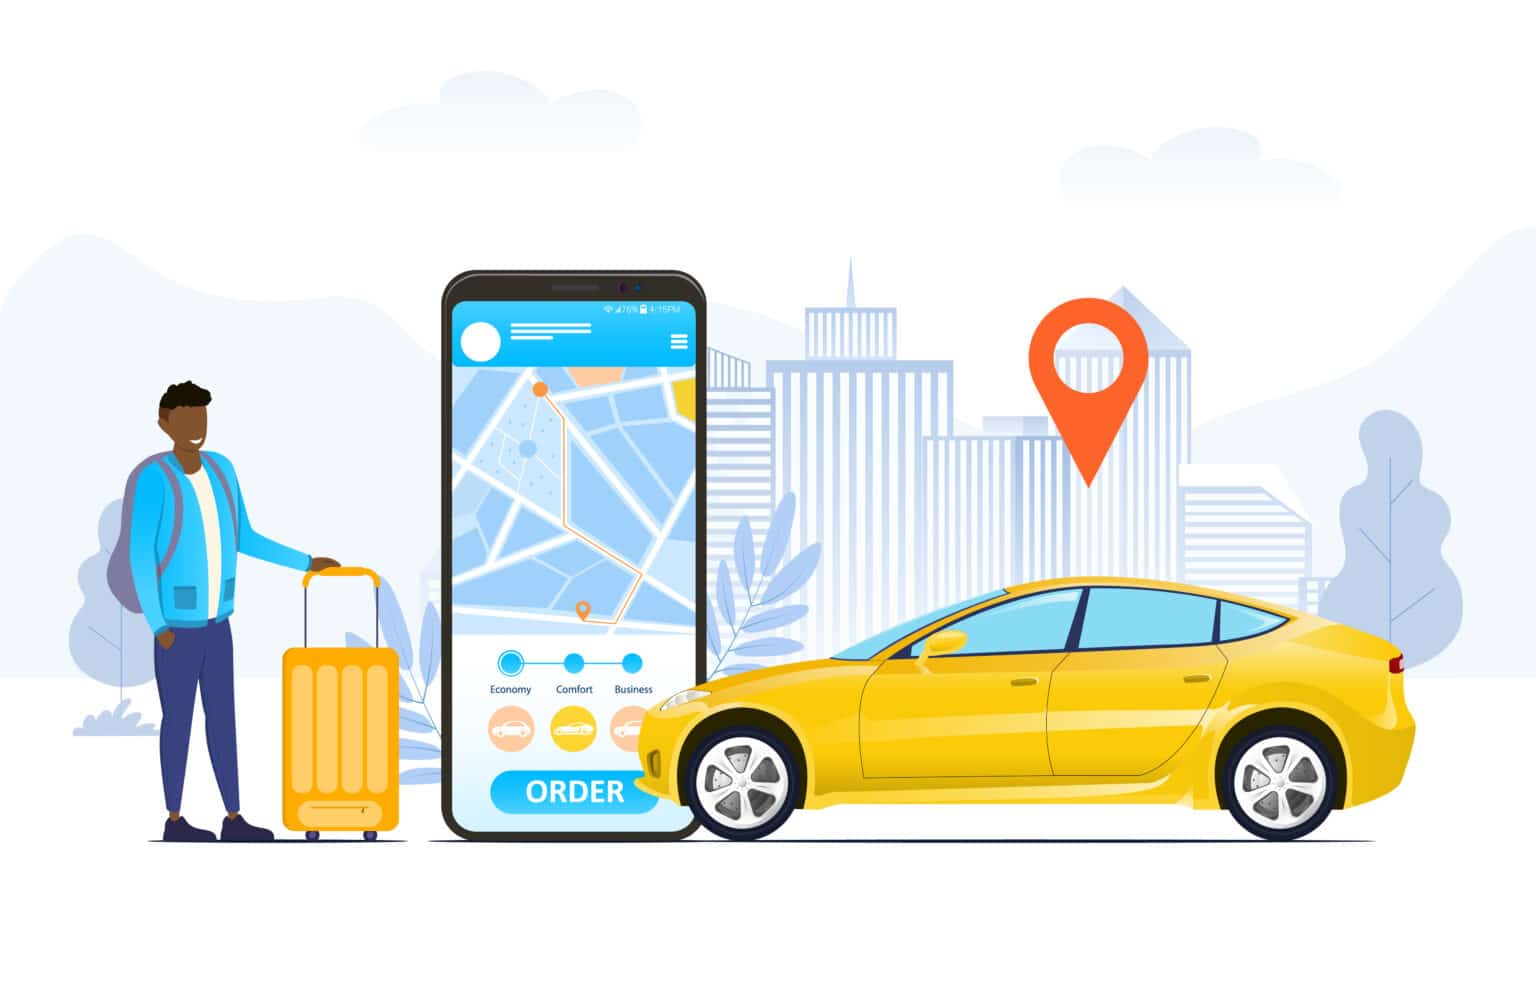 Ride-hailing app - inDrive and SHIELD partner